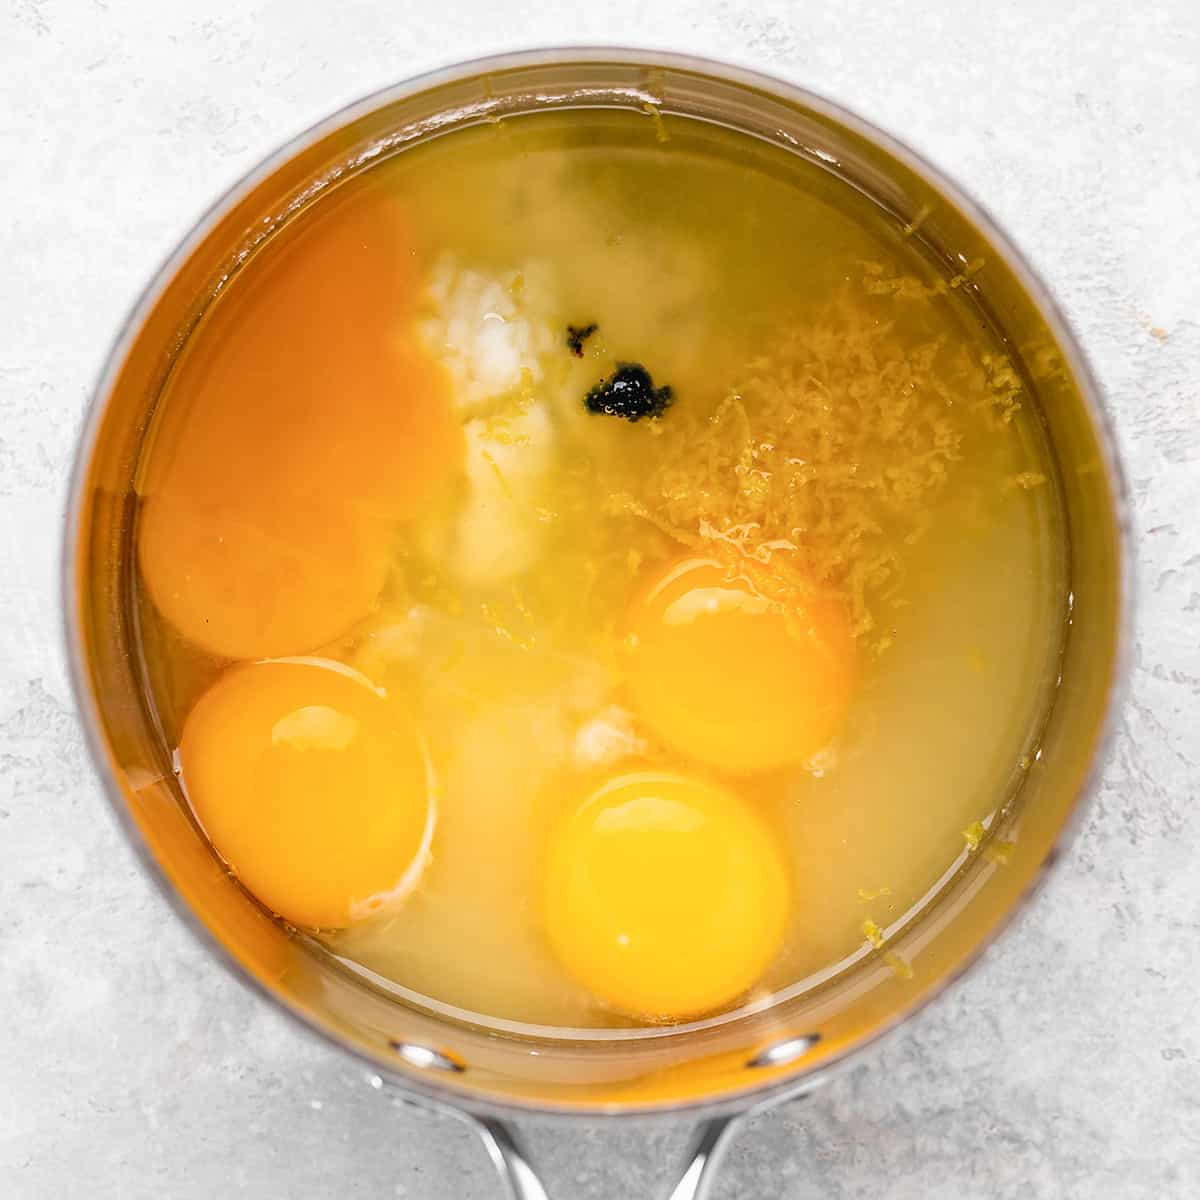 How to Make Lemon Curd - ingredients in a saucepan before whisking